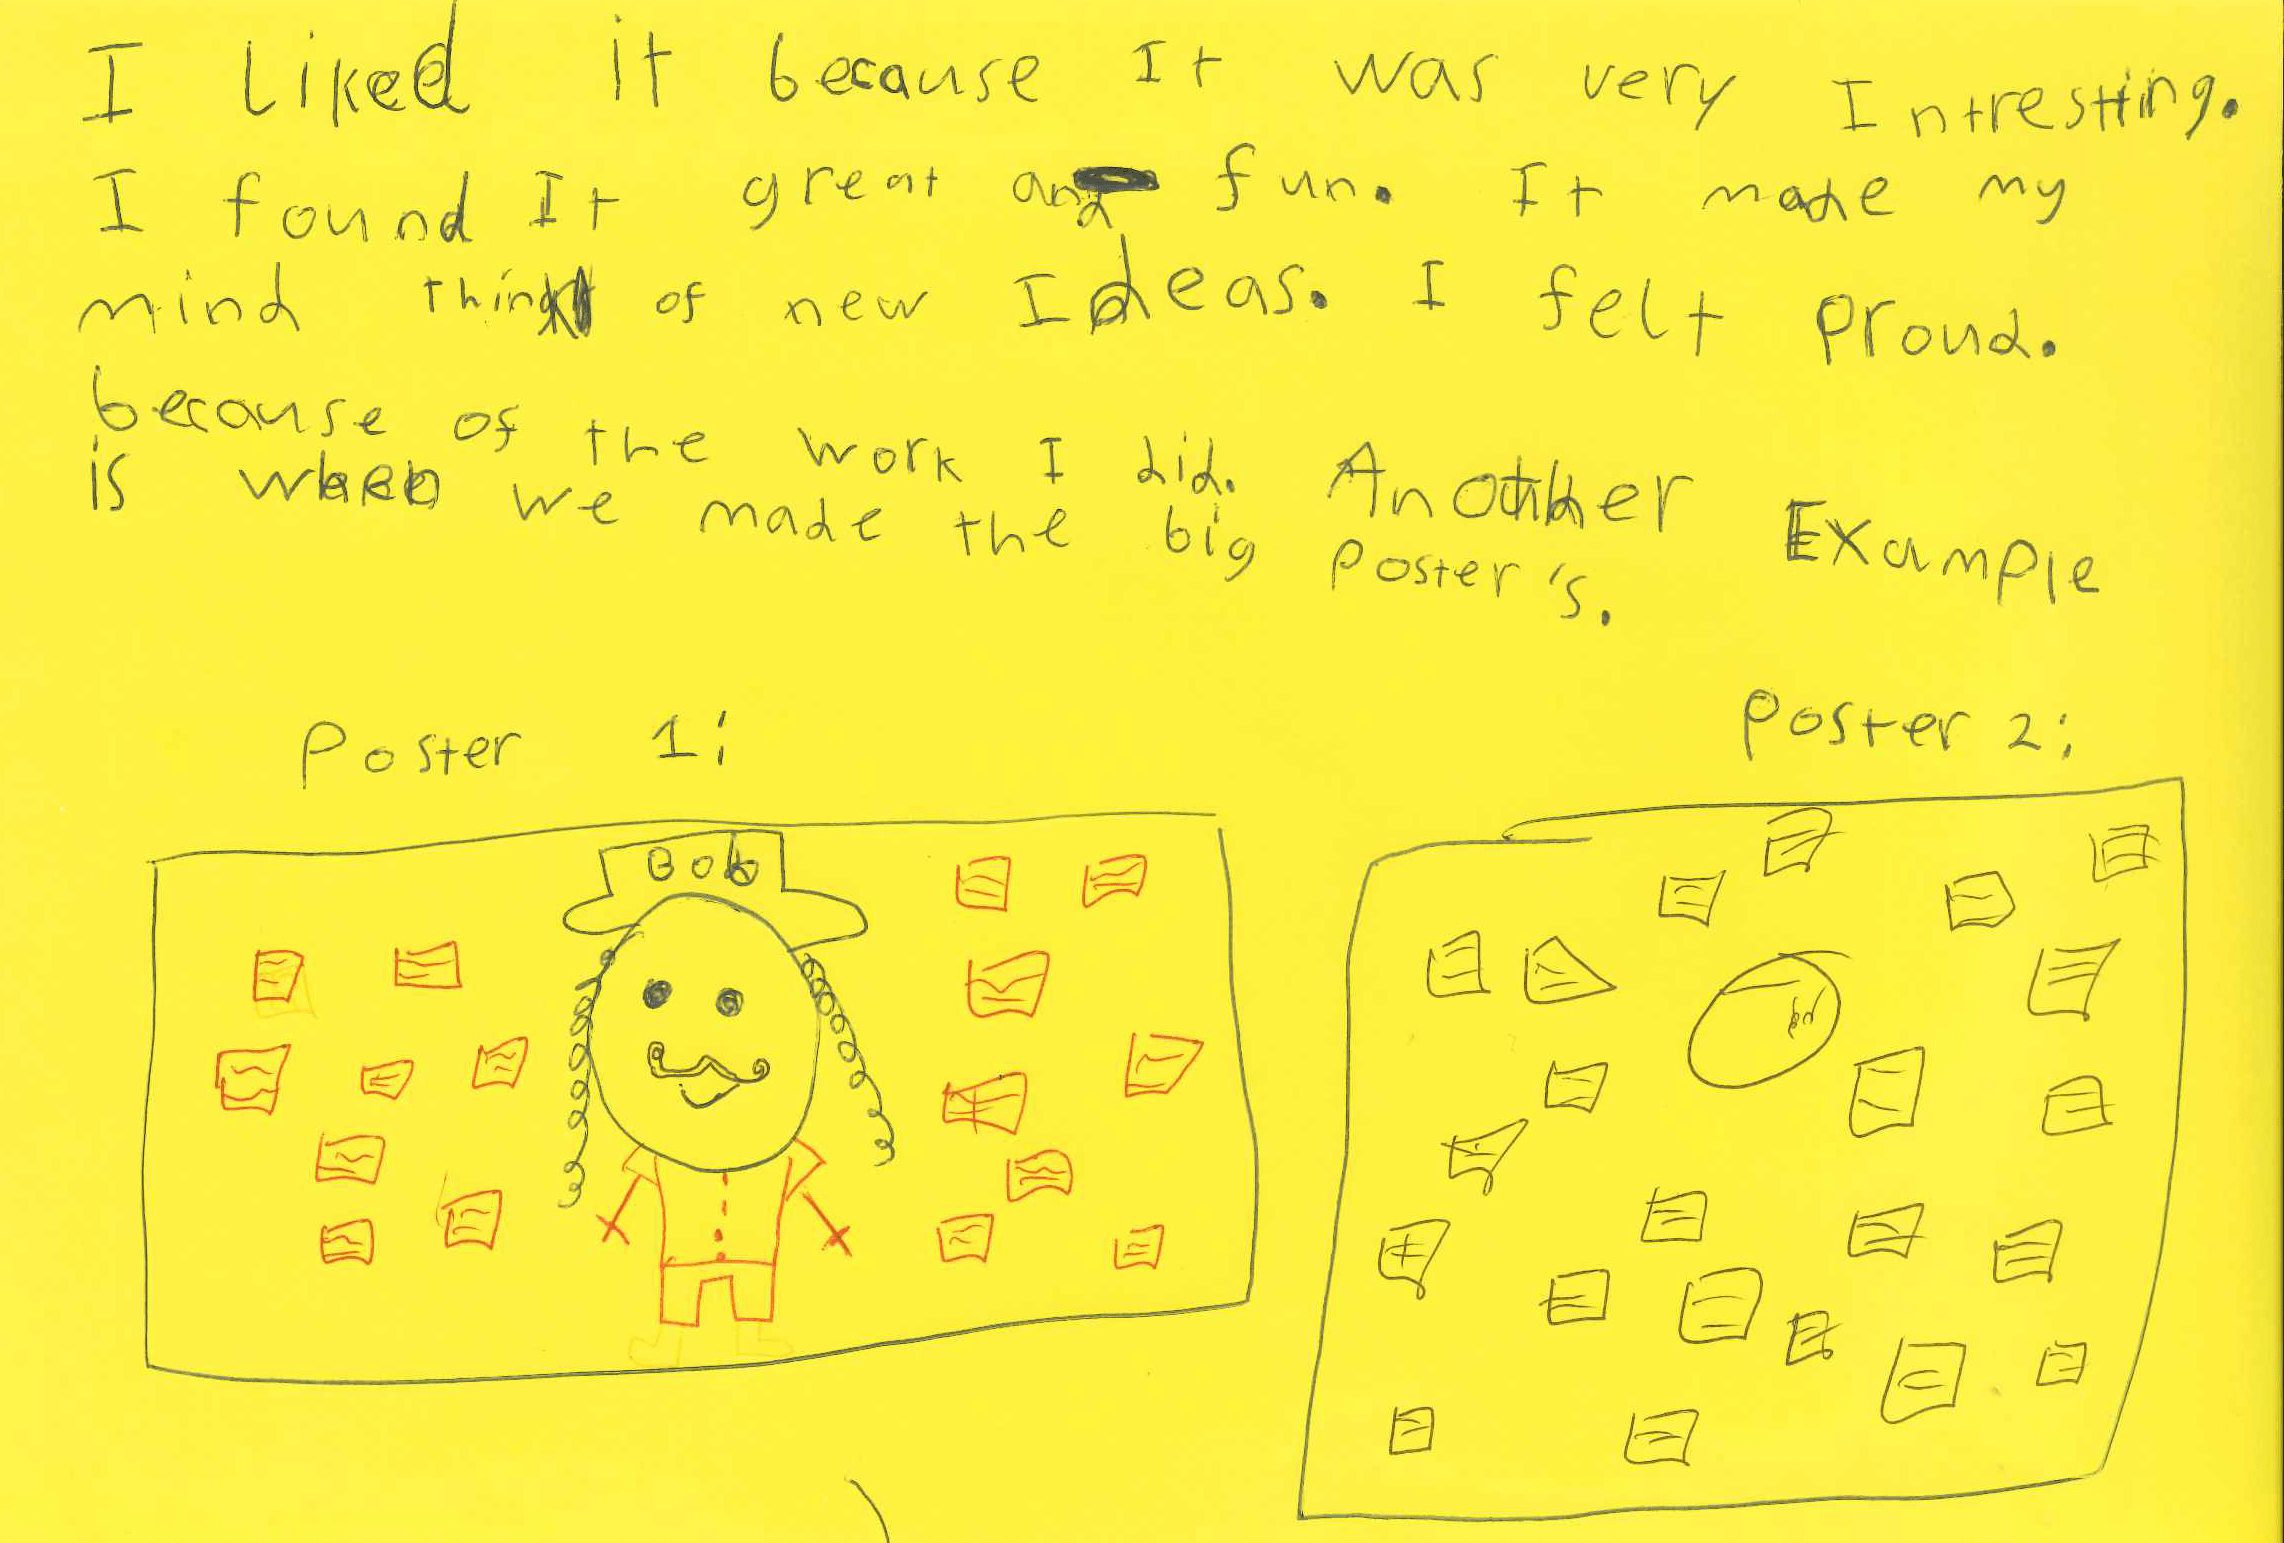 Child's drawing about enjoying the workshop